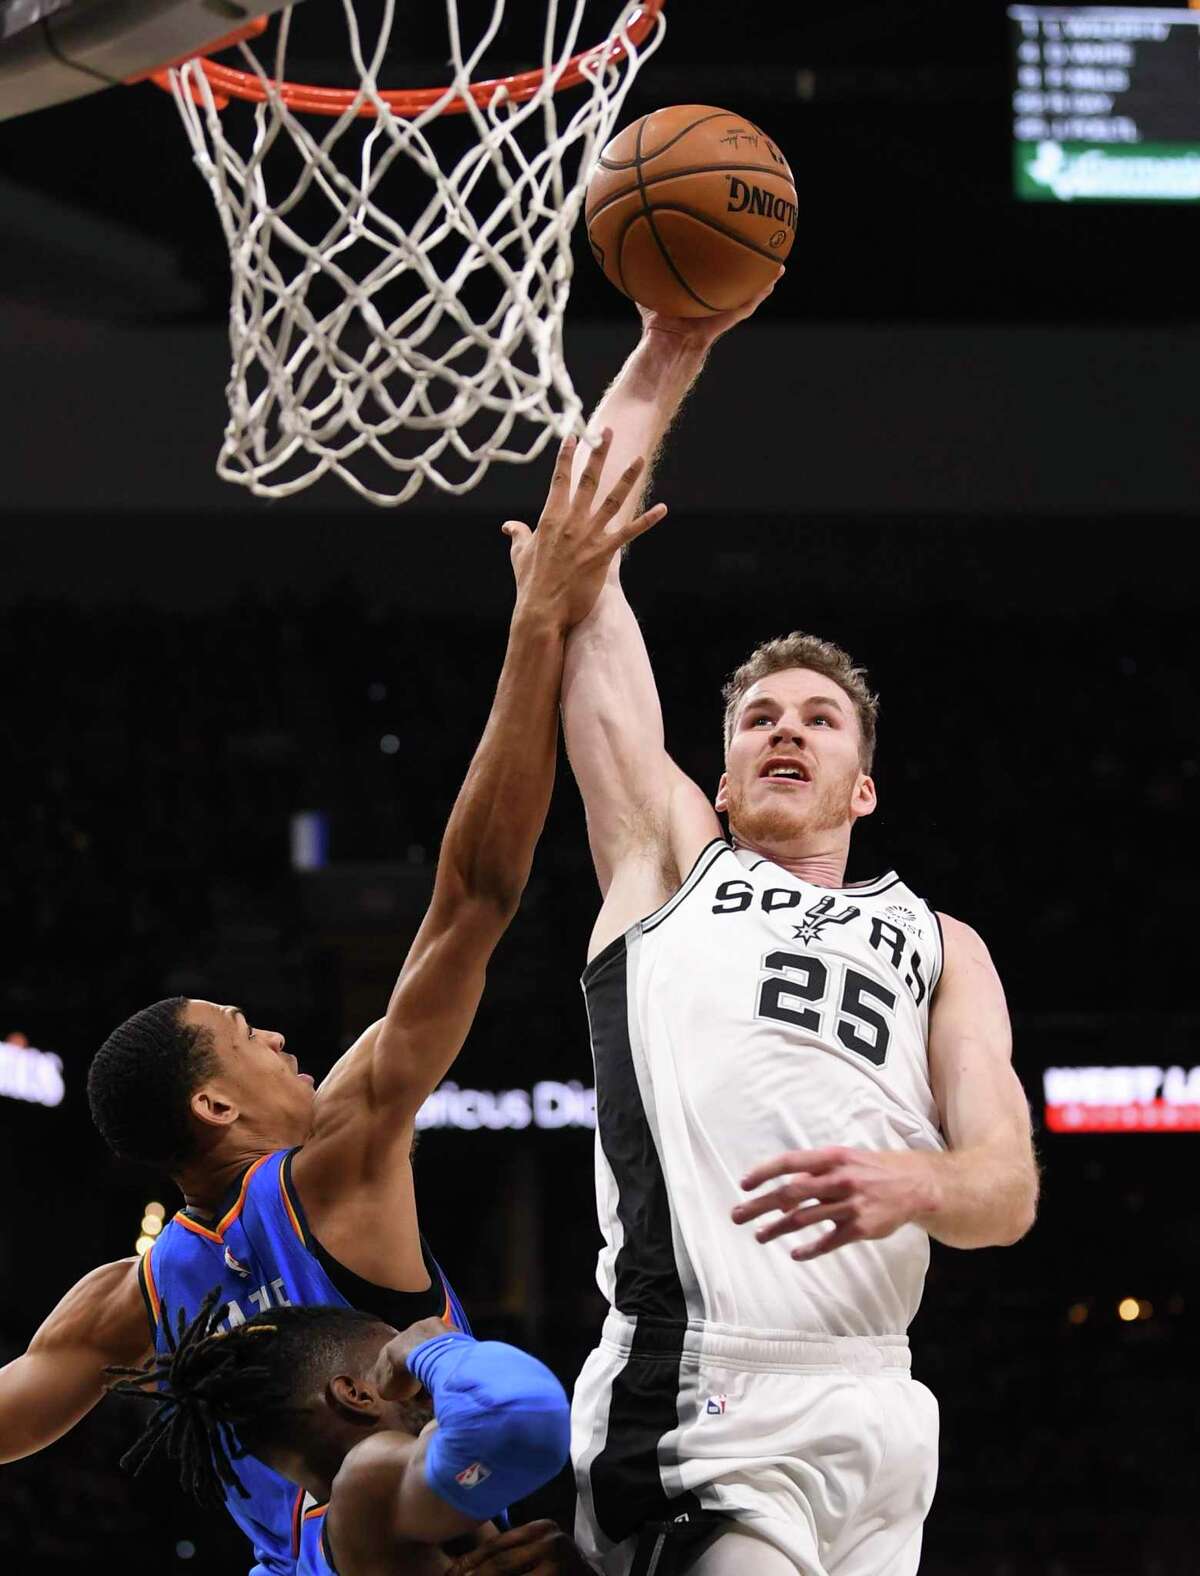 Jakob Poeltl of the San Antonio Spurs (25) dunks the ball over Darius Bazley (7) and Nerlens Noel (9) of the Oklahoma City Thunder during NBA action in the AT&T Center on Thursday, Jan. 2, 2020.